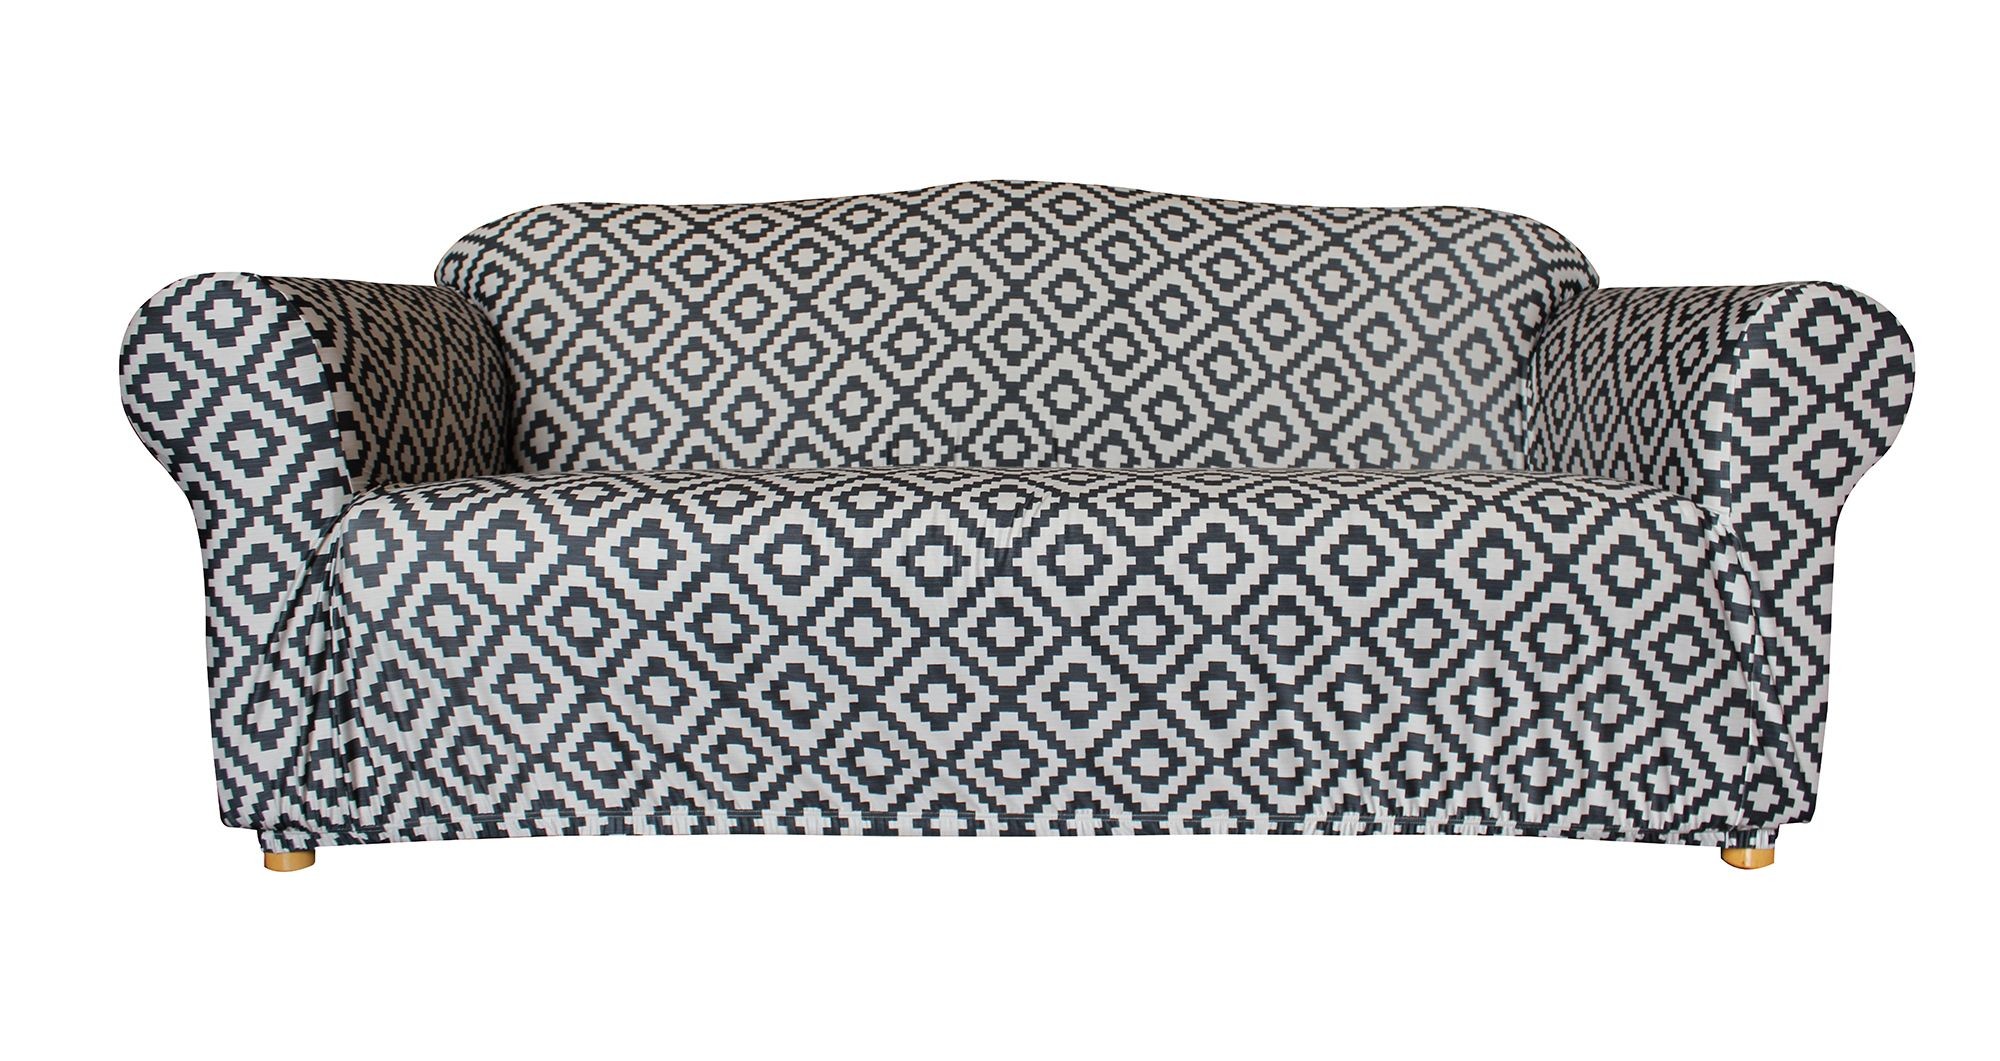 Tribal 3 Seater Couch Cover by Surefit